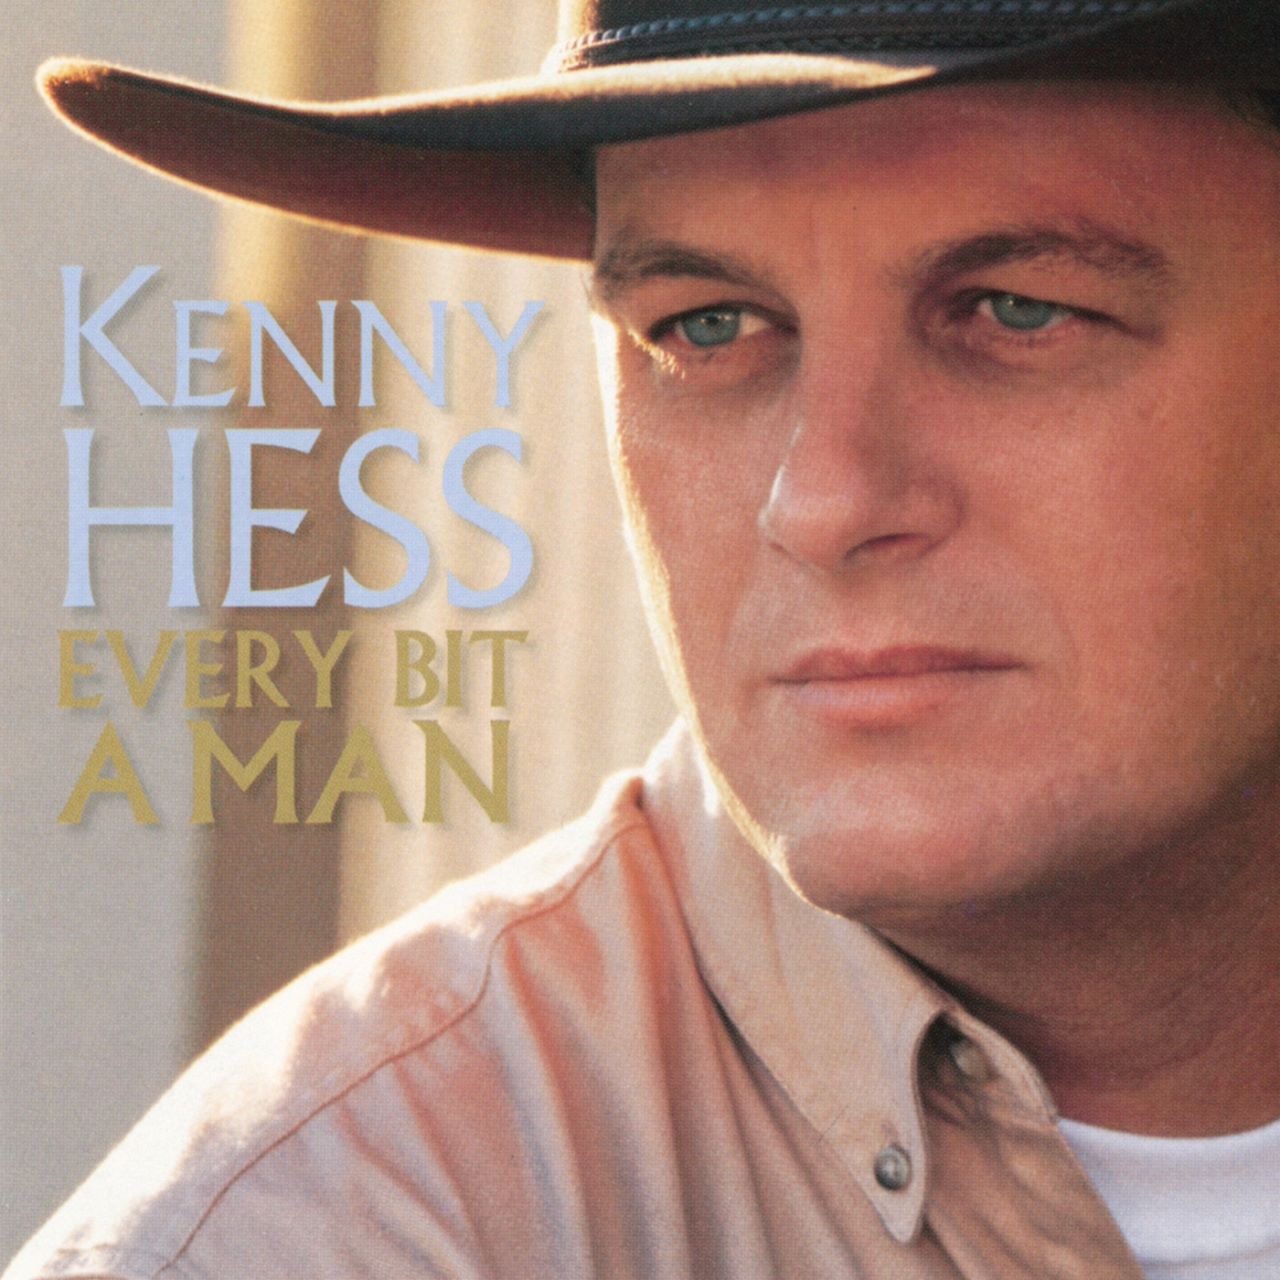 Kenny Hess - Every Bit A Man cover album